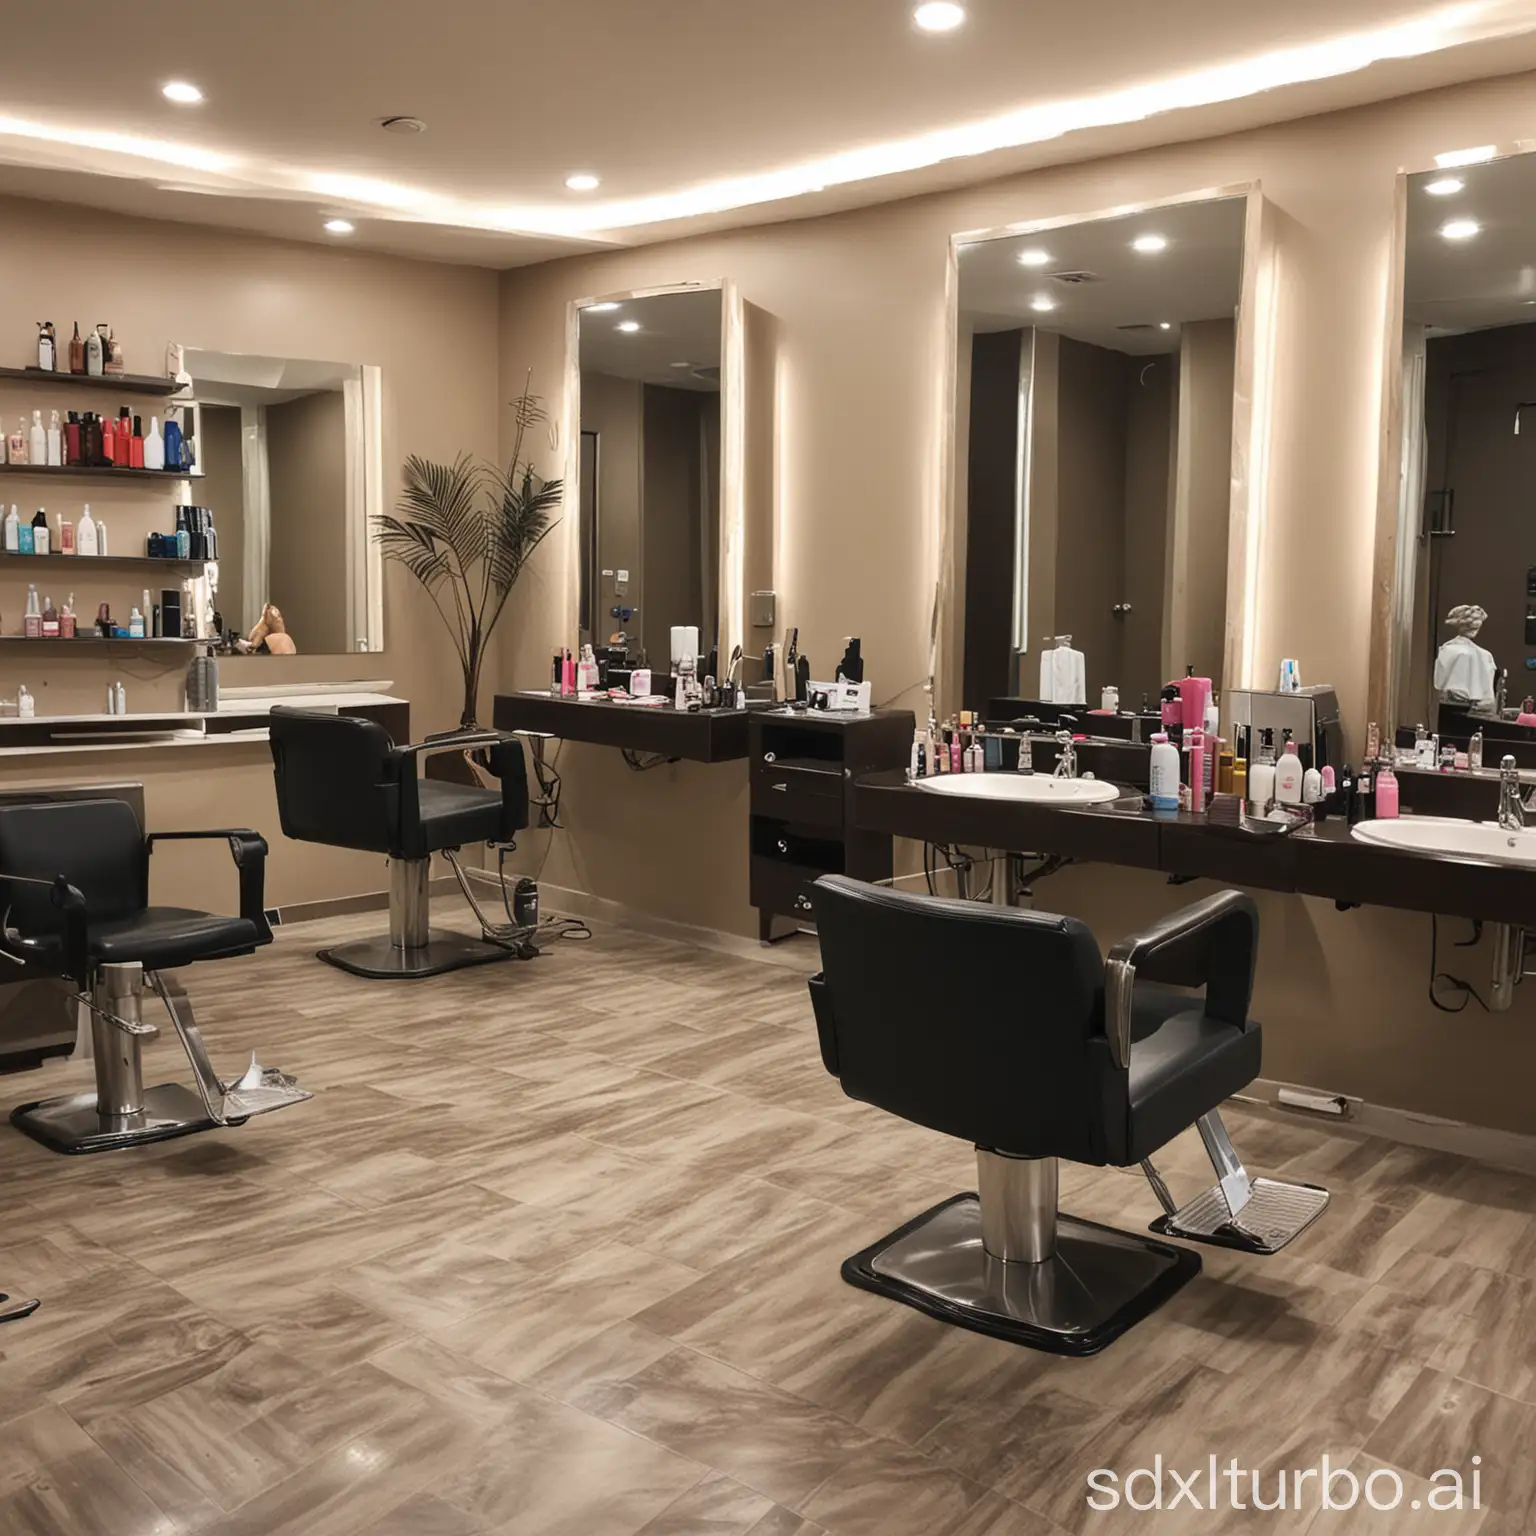 Modern-Hair-Salon-Interior-with-Stylish-Hairstyling-Stations